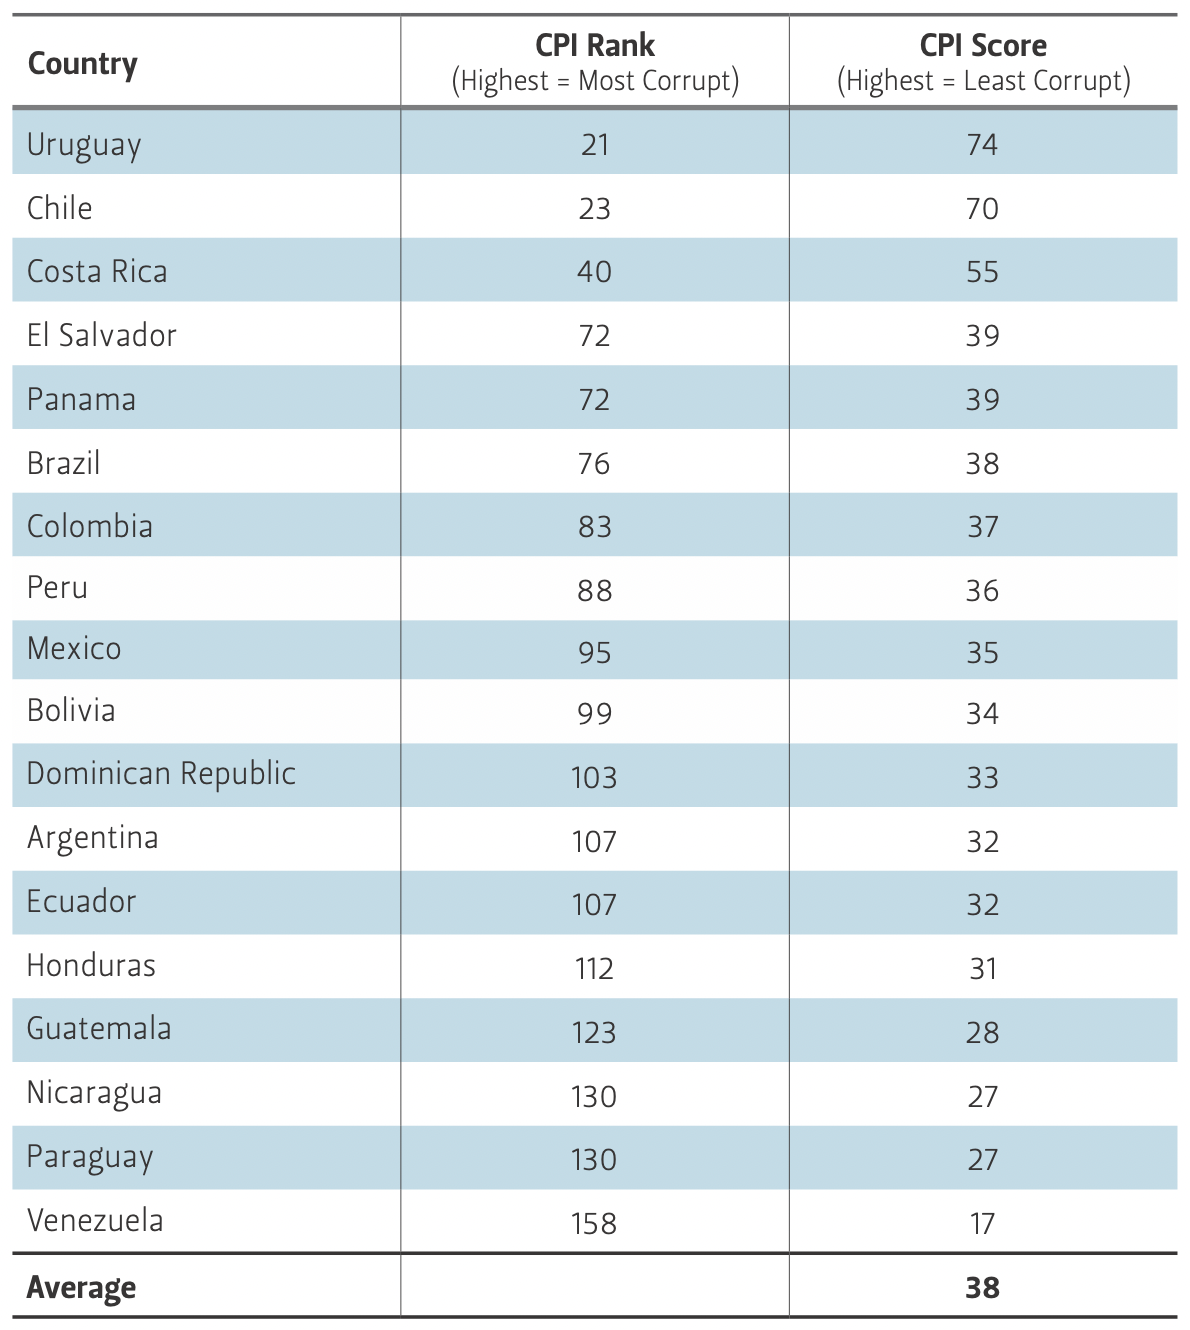 This table lists CPI ranks and CPI scores for various countries.